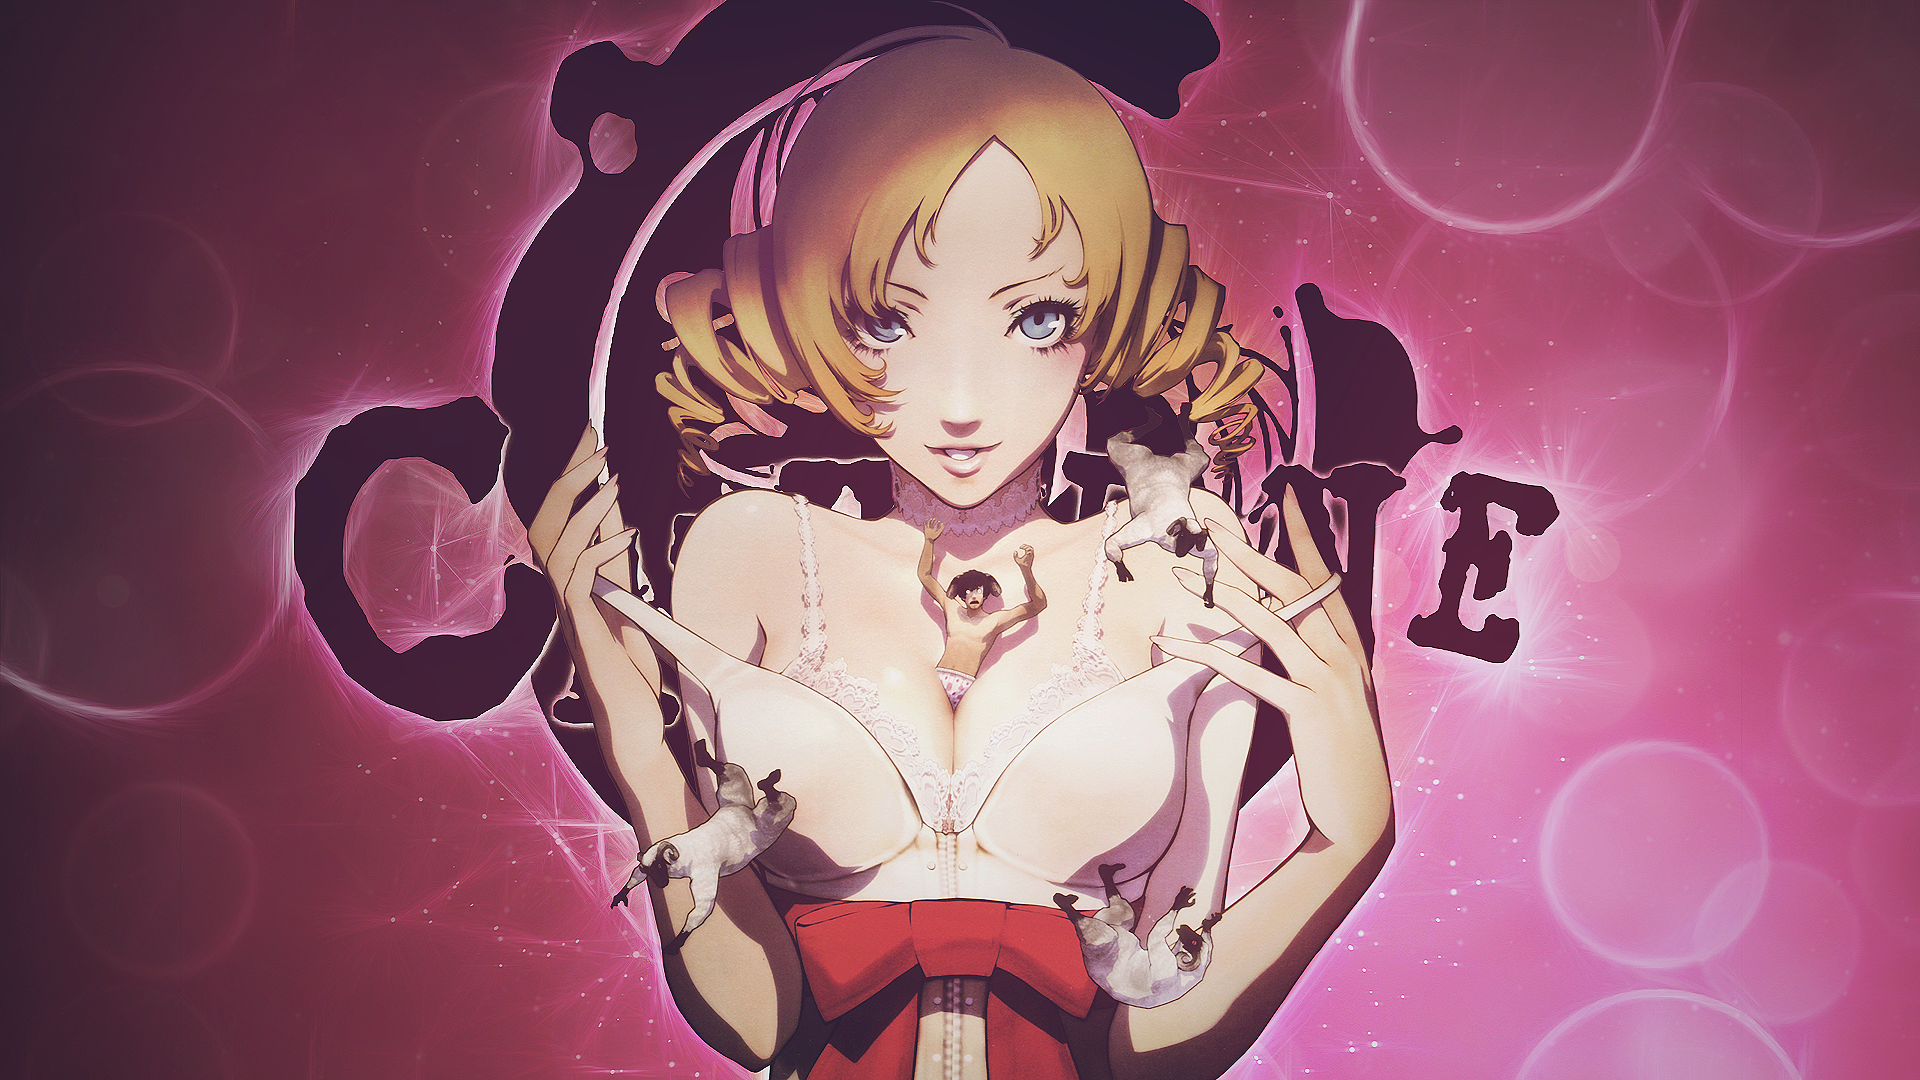 Nice Images Collection: Catherine Desktop Wallpapers